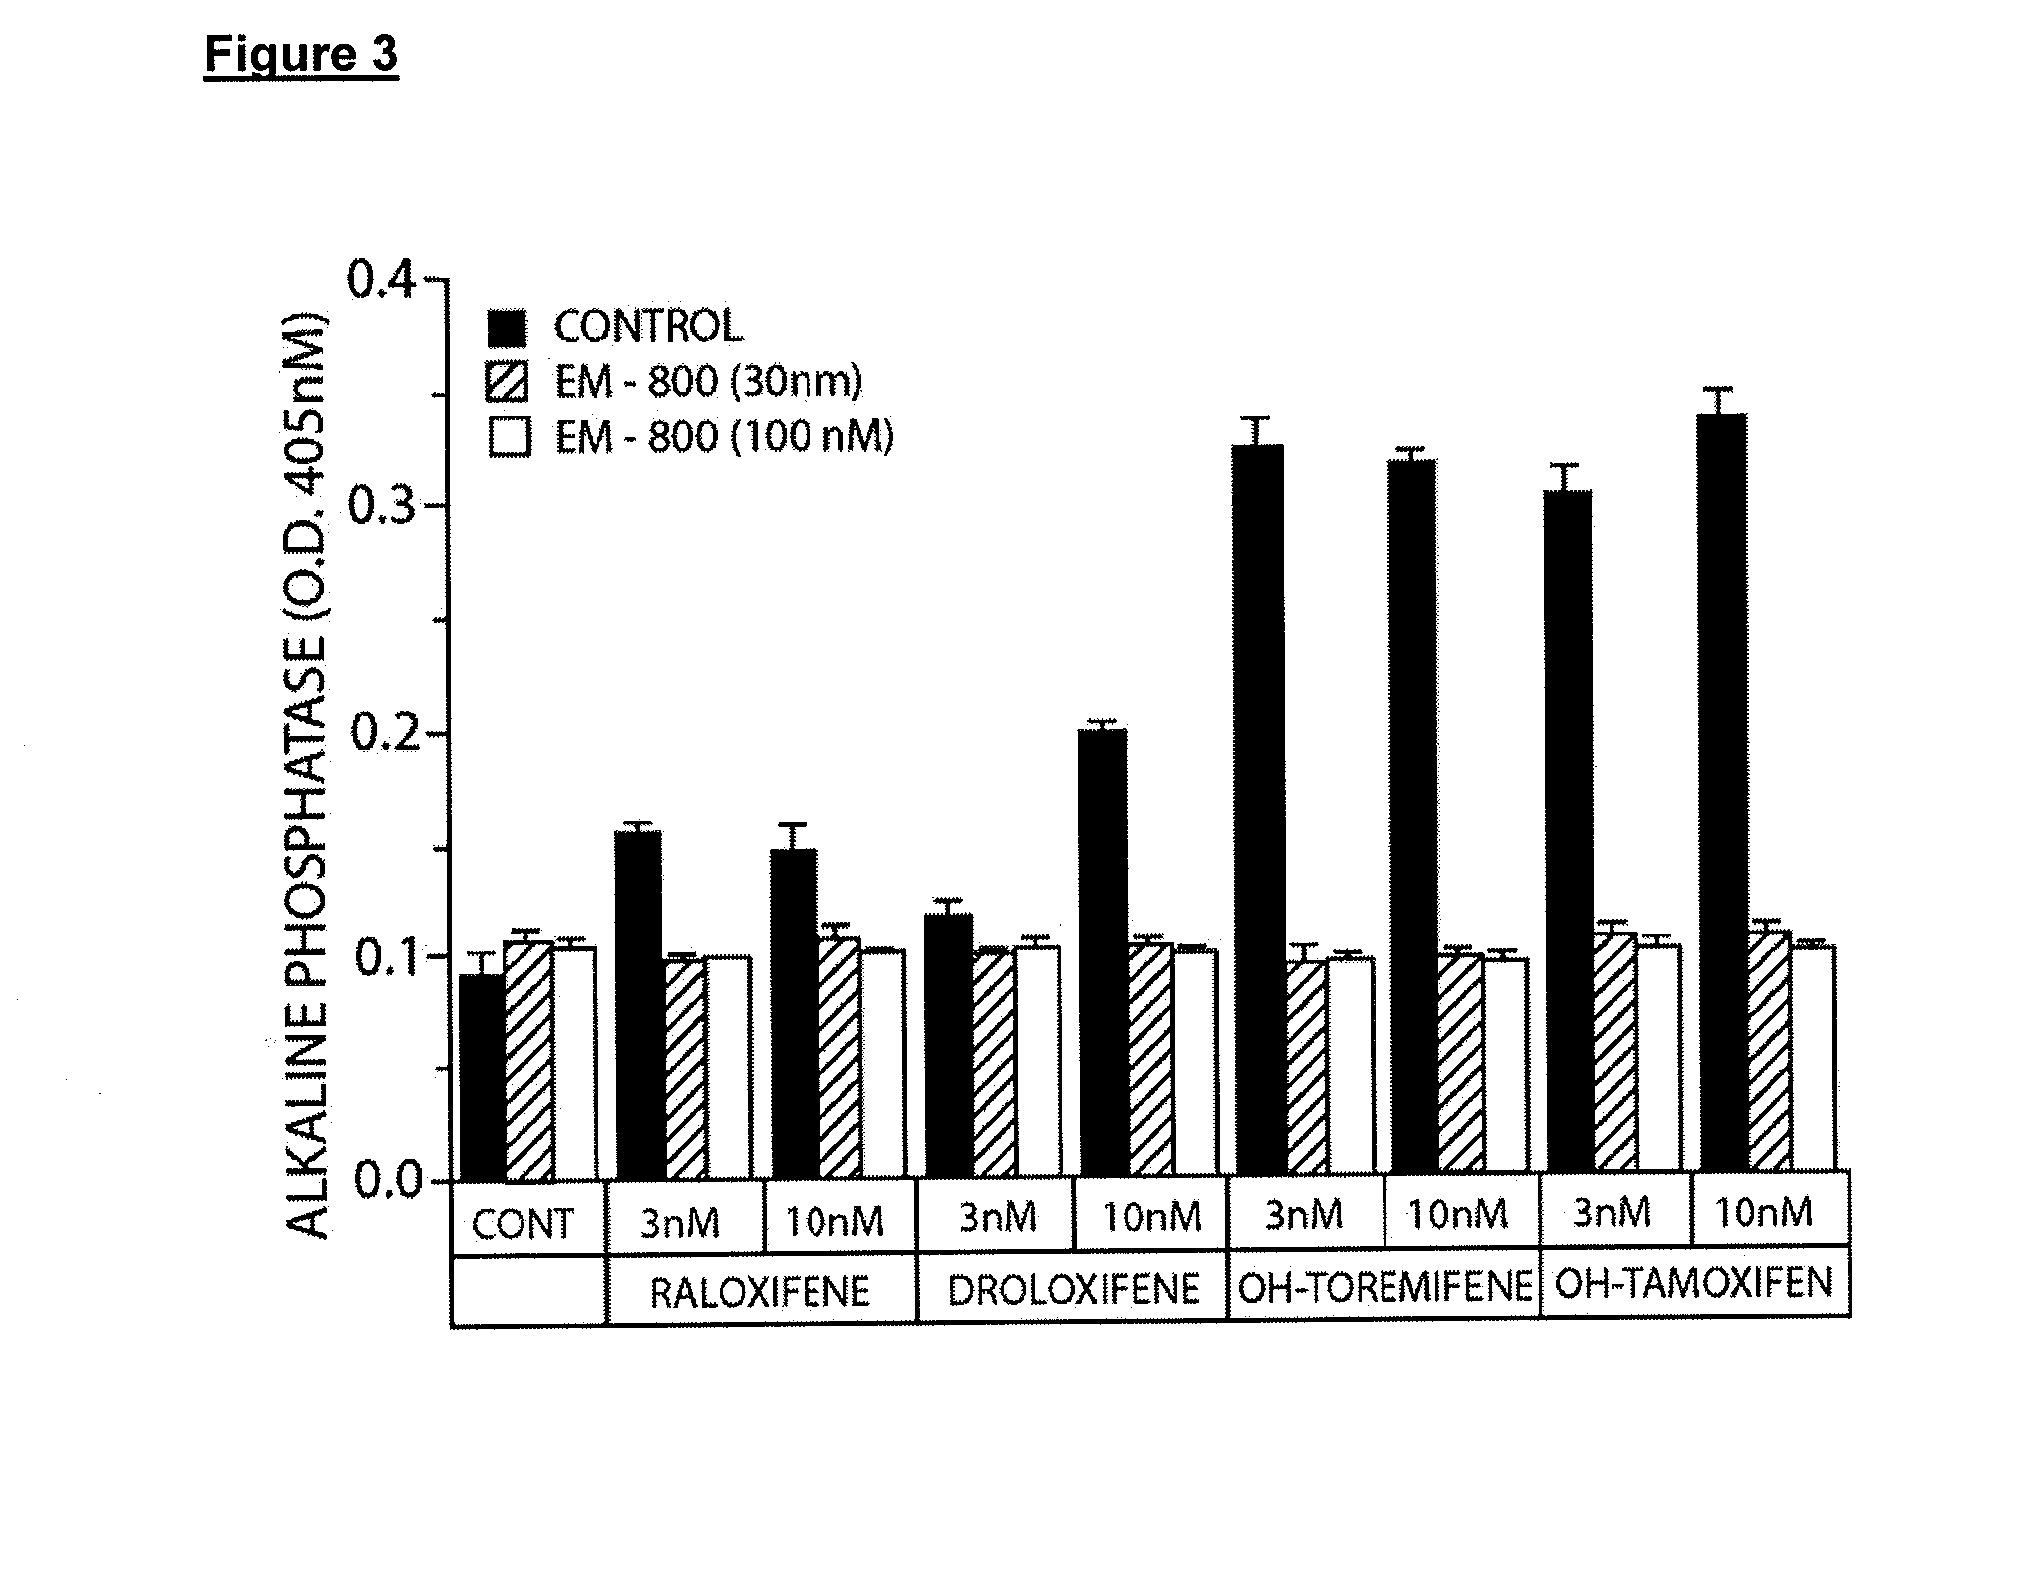 Treatment of male androgen deficiency symptoms or diseases with sex steroid precursor combined with serm